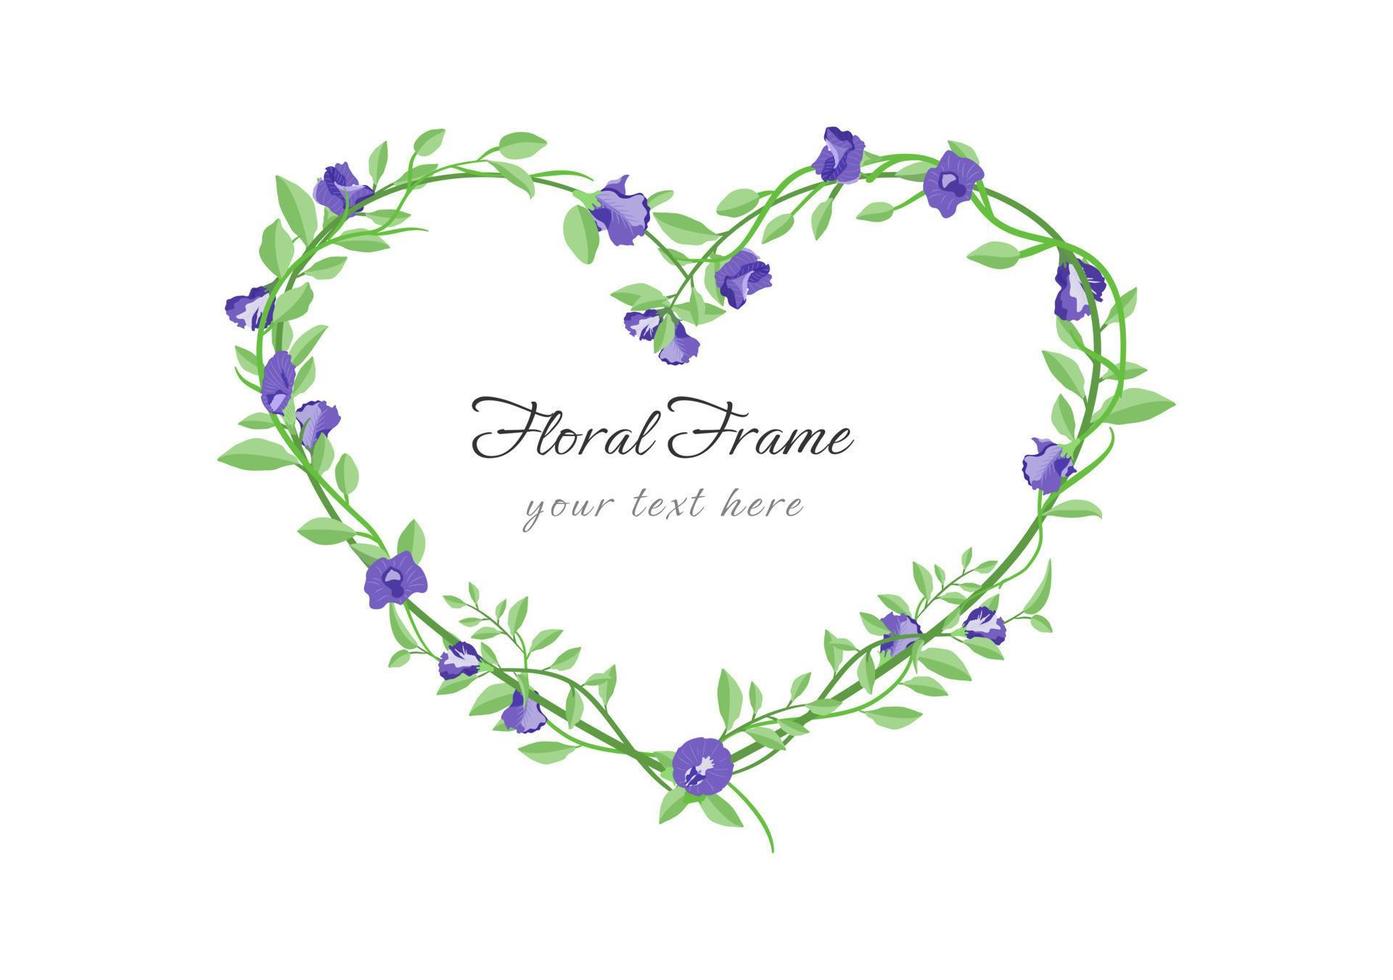 butterfly pea flower in heart frame isolated on white background vector